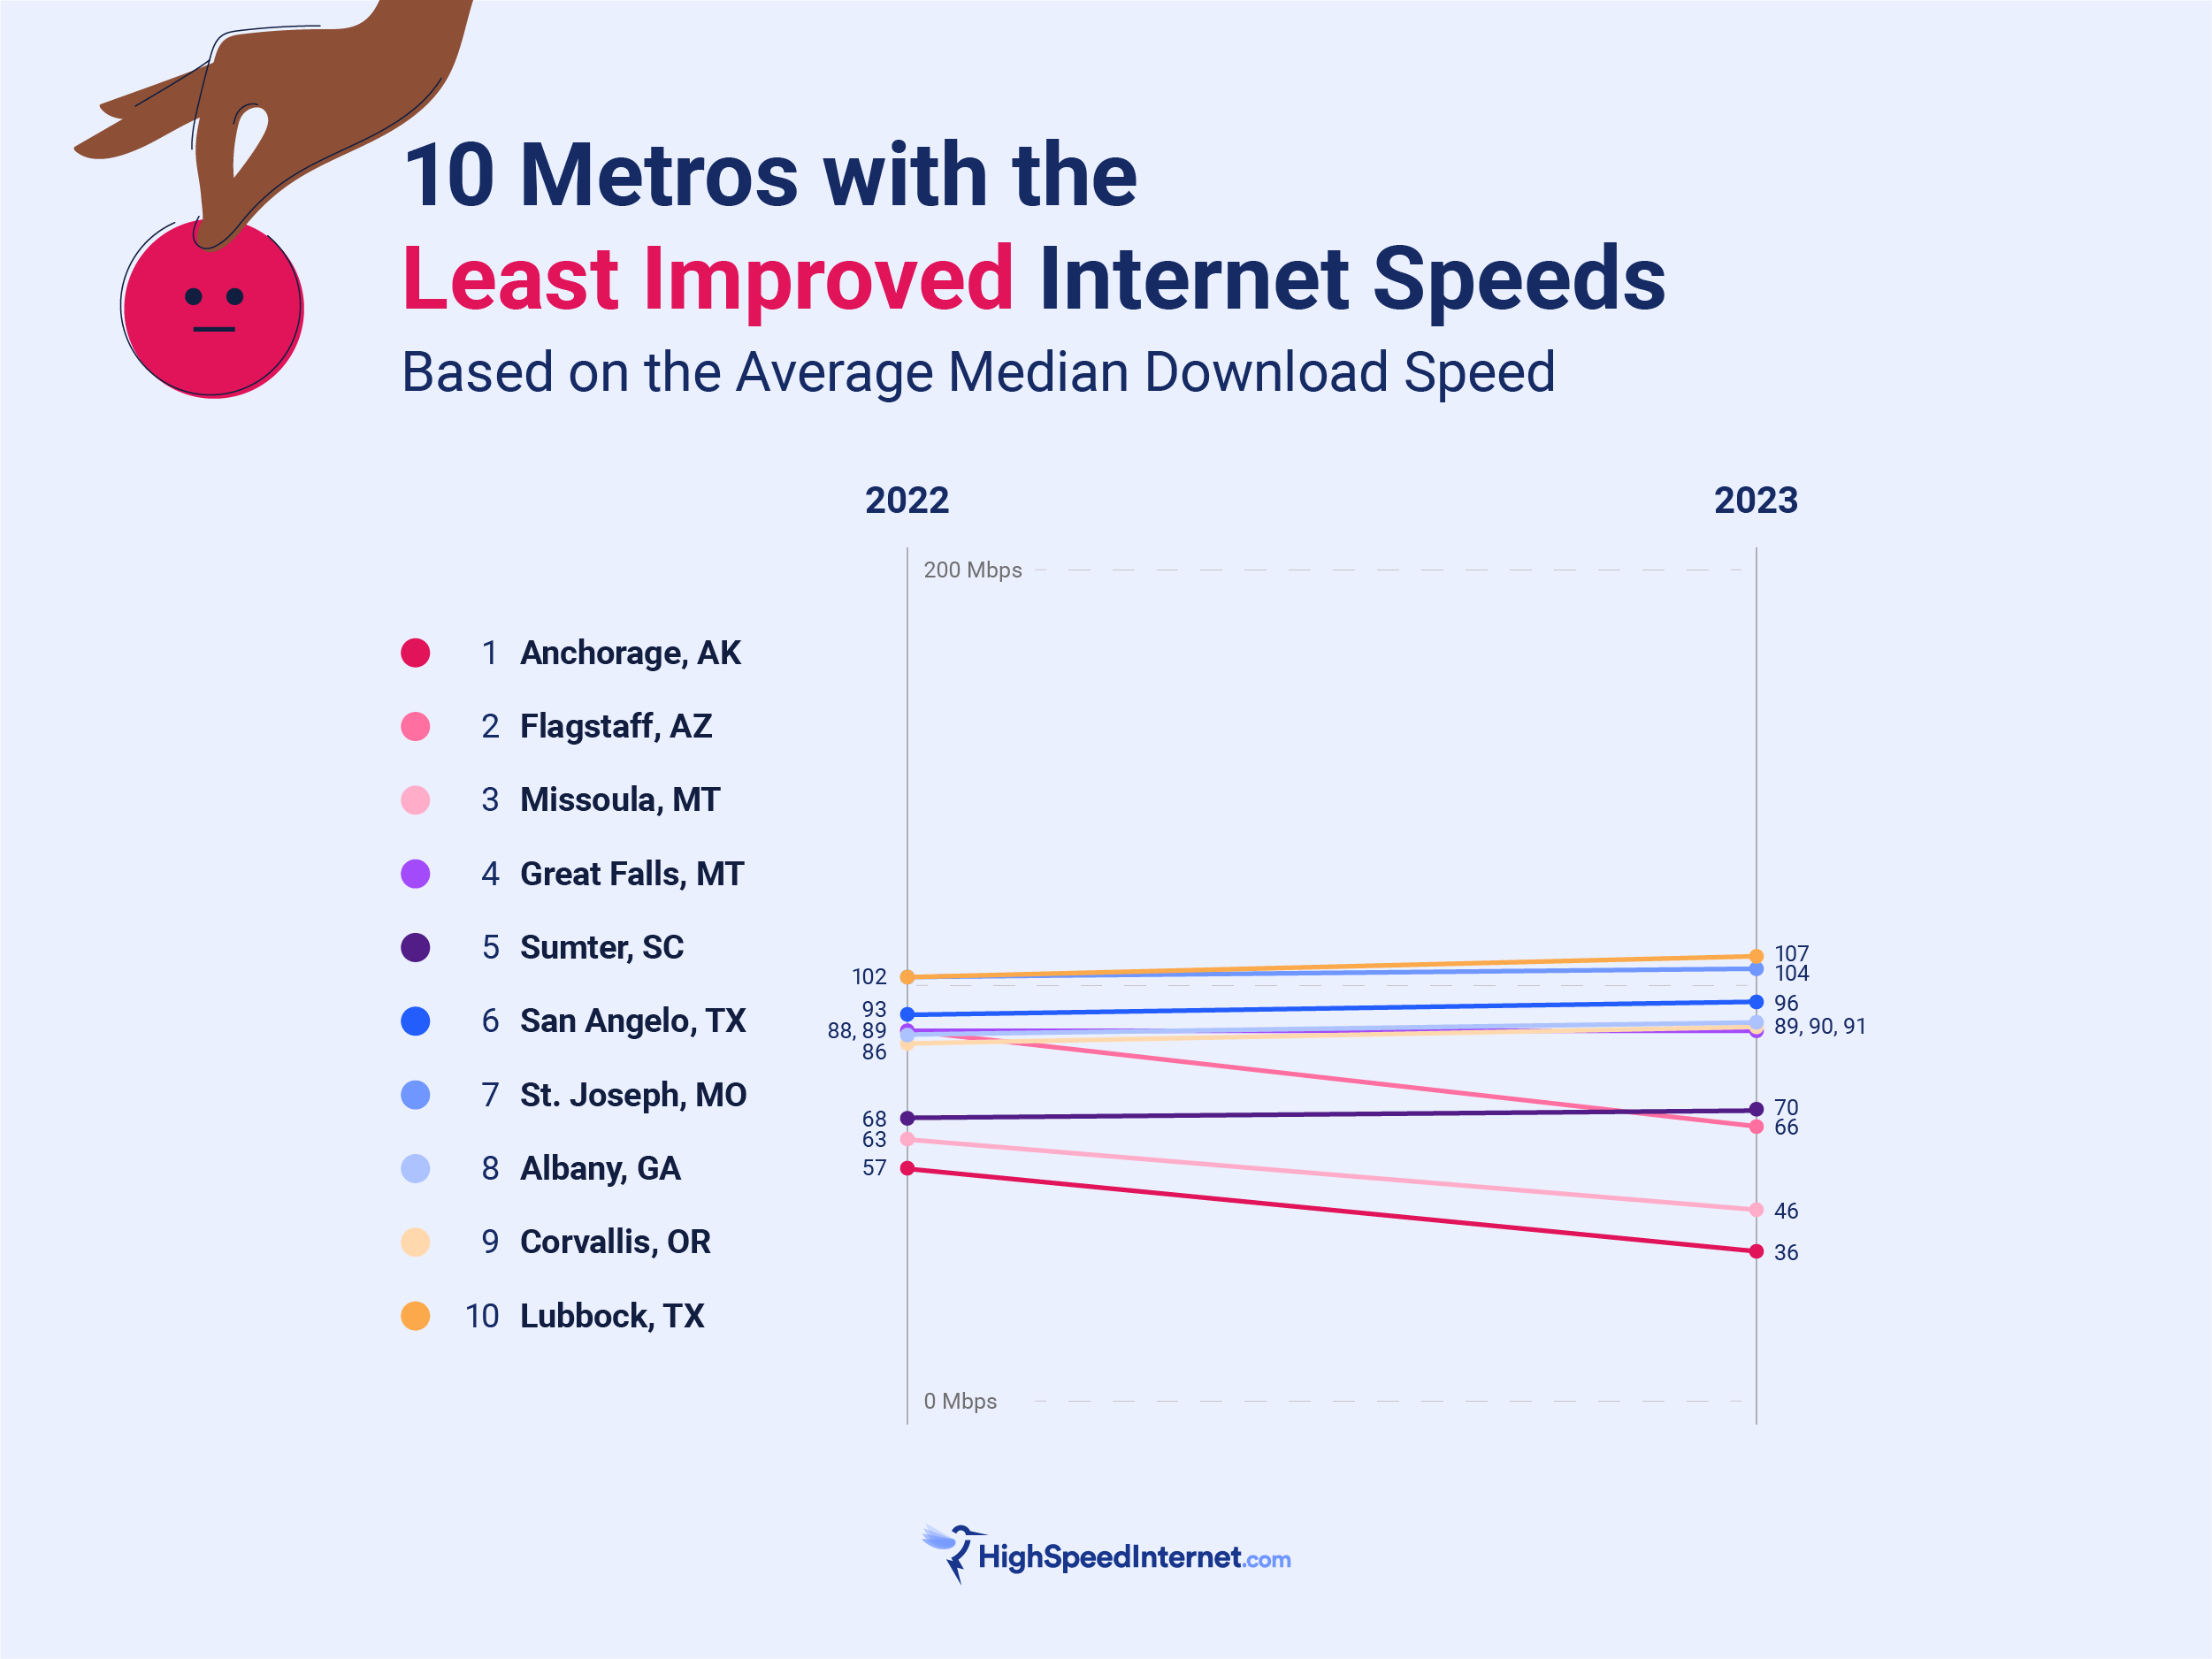 Line chart showing the US metro cities that have the least improved internet speeds from 2022 to 2023